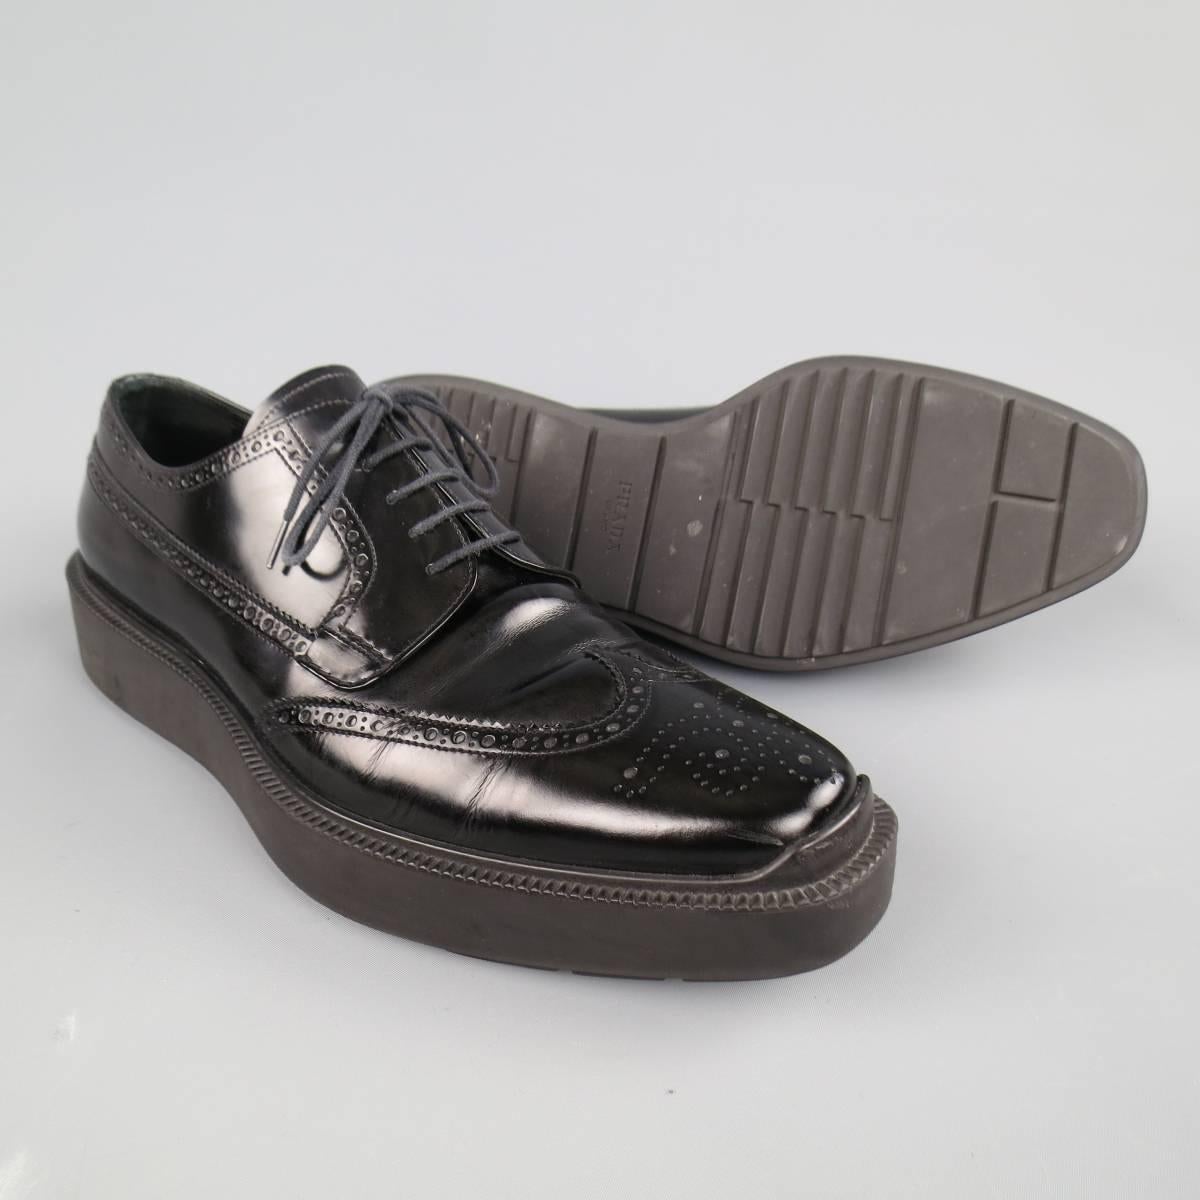 Chic PRADA dress shoes in aa smooth semi patent lather featuring a squared off pointed toe with wingtip, perforated brogue details throughout, and thick rubber platform sole. Made in Italy.
 
Excellent Pre-Owned Condition.
 
Outsole: 13 x 4.75